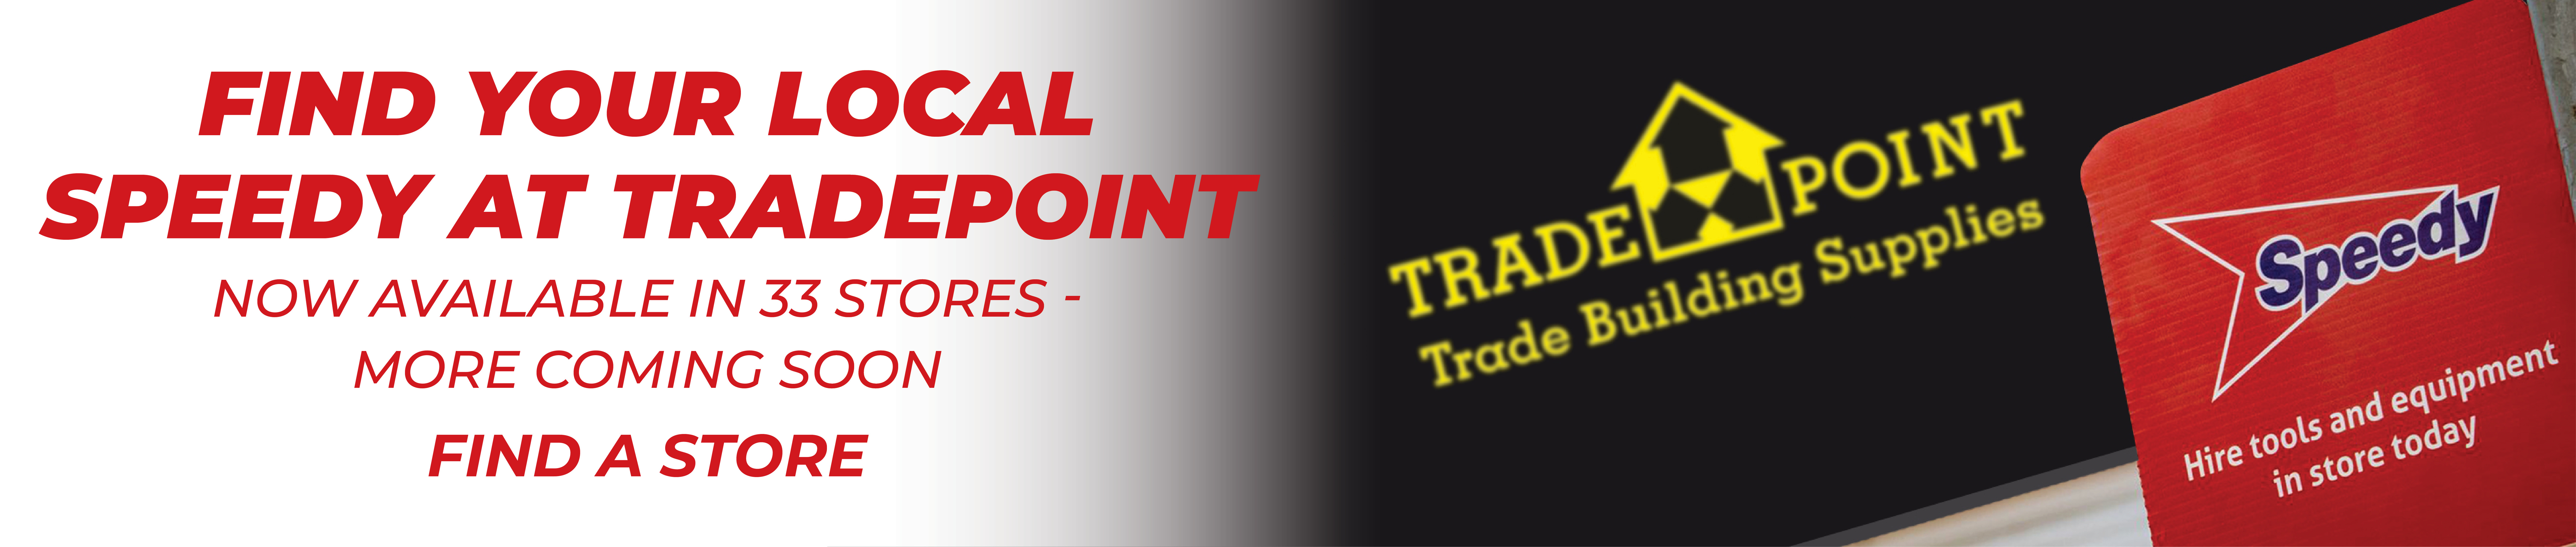 Find your nearest Speedy at Tradepoint.